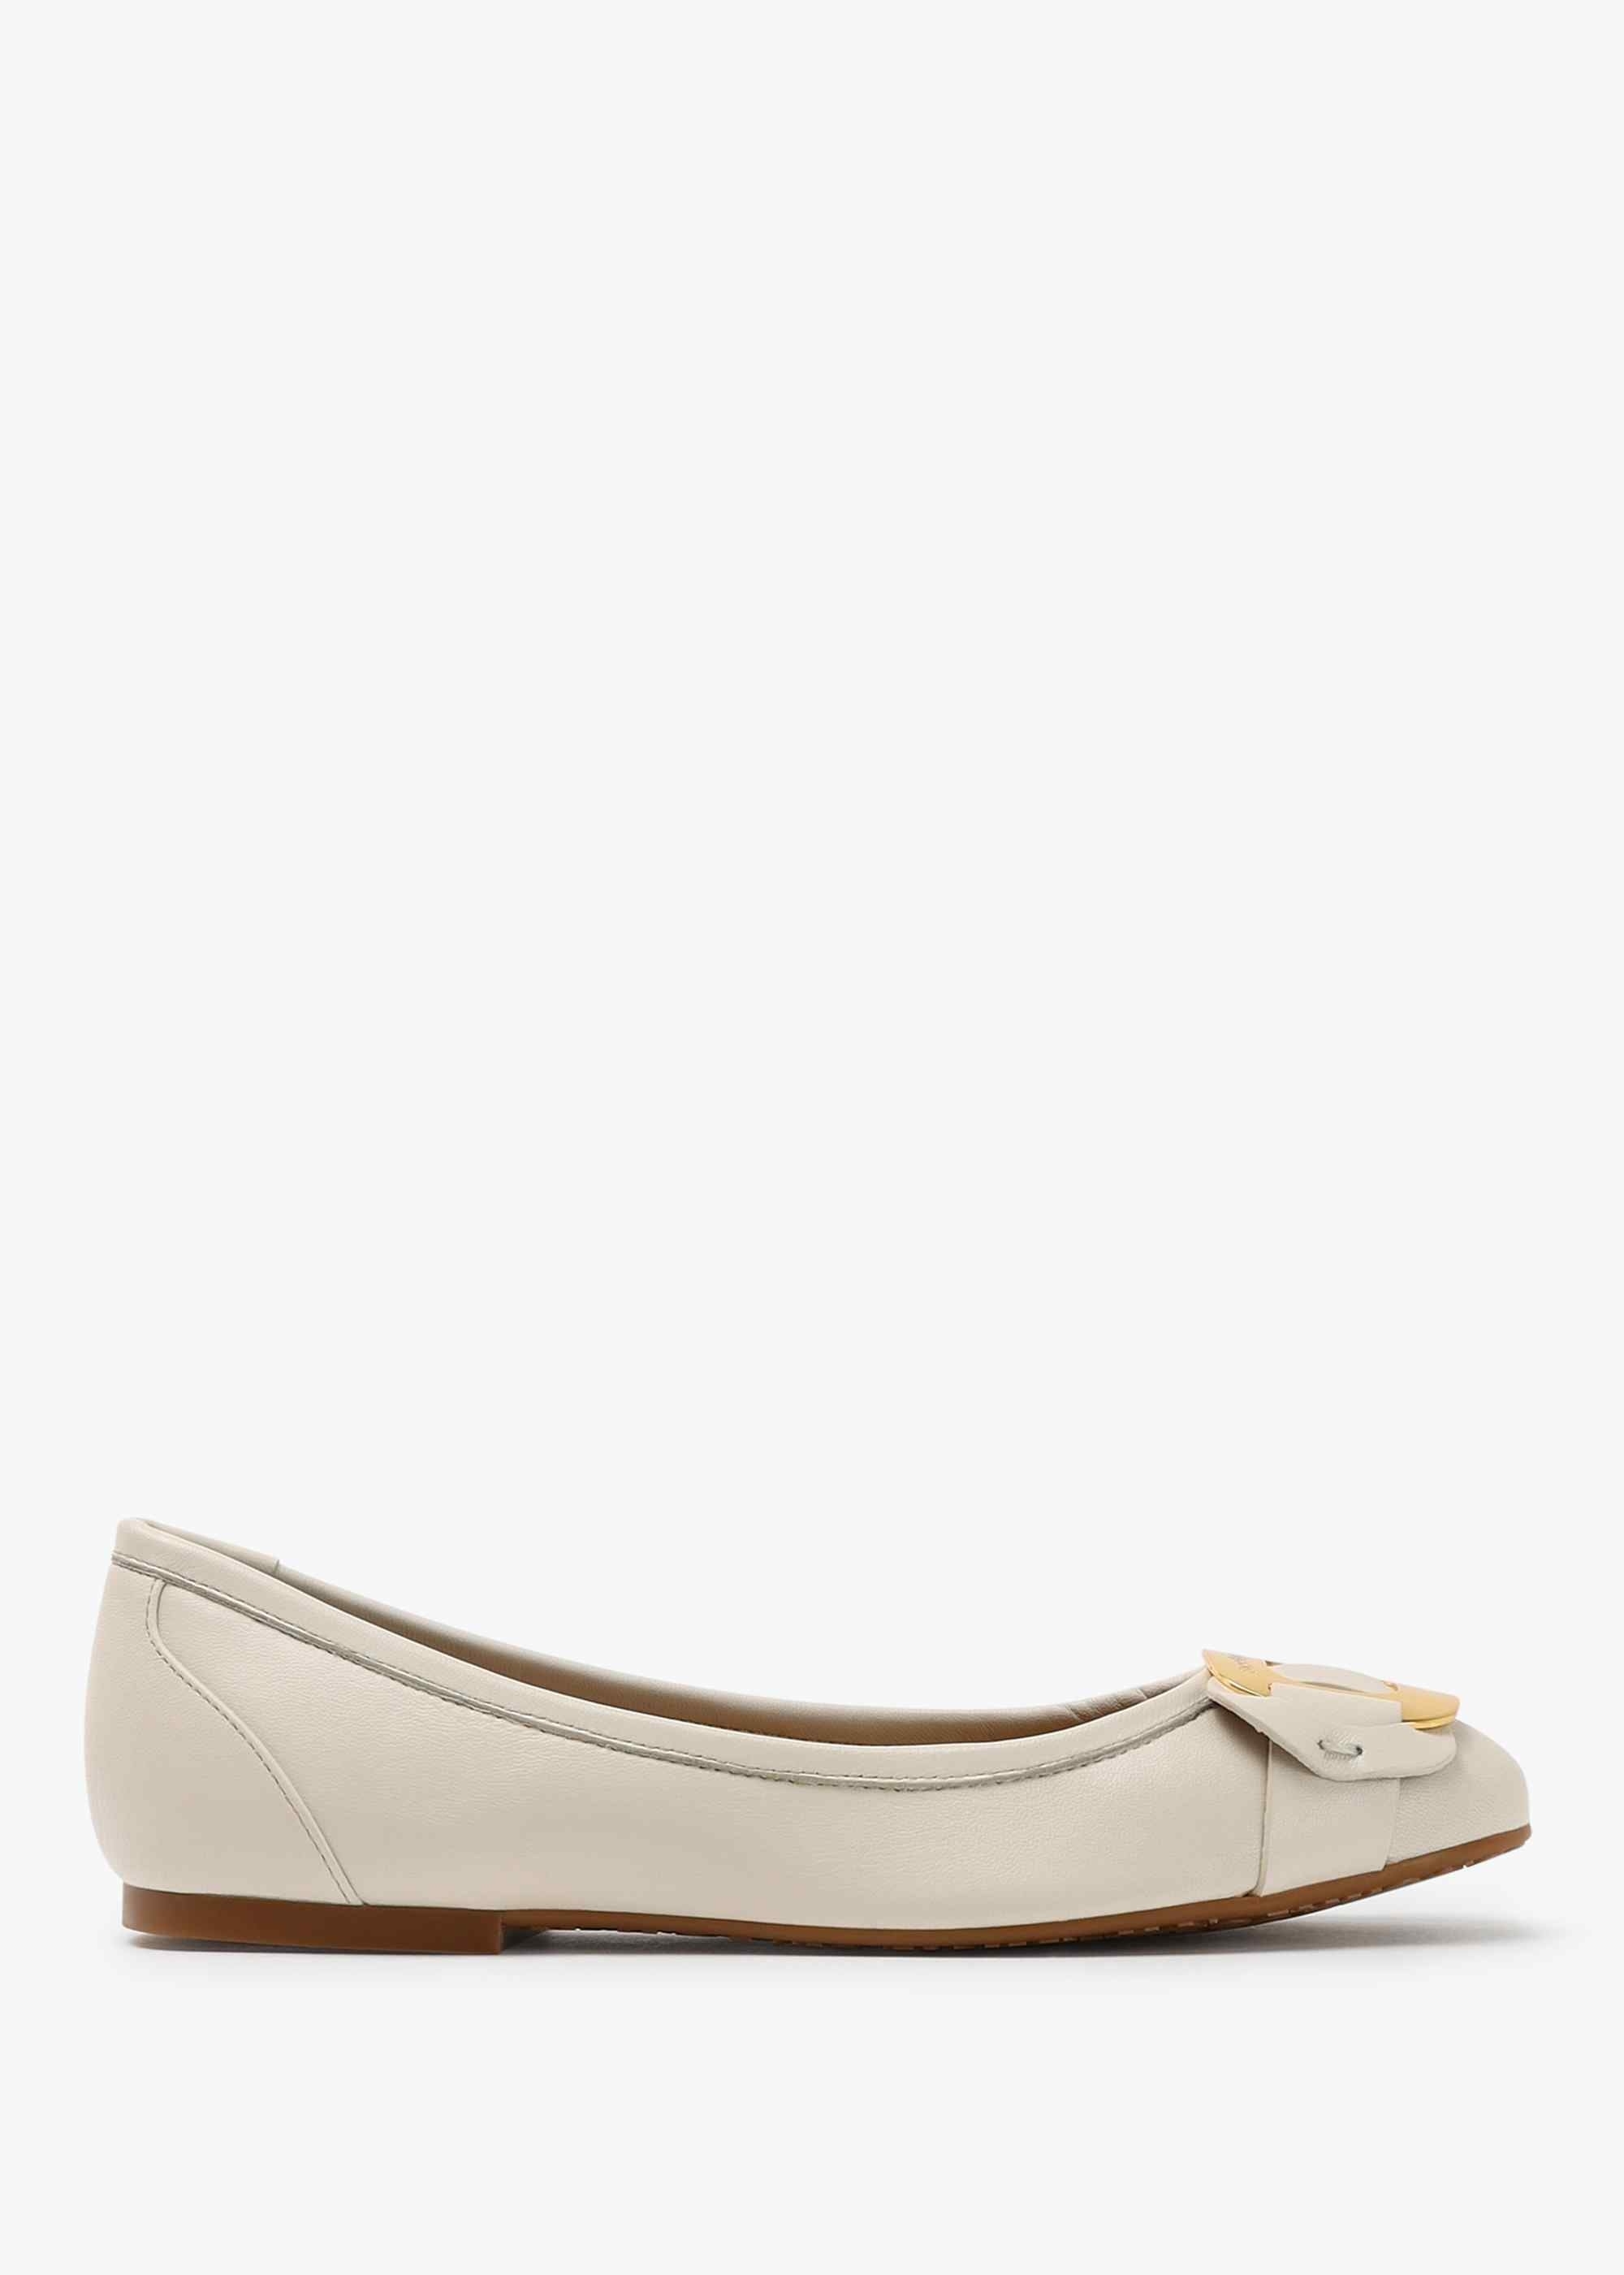 See by Chloe Chany White Ballet Flats